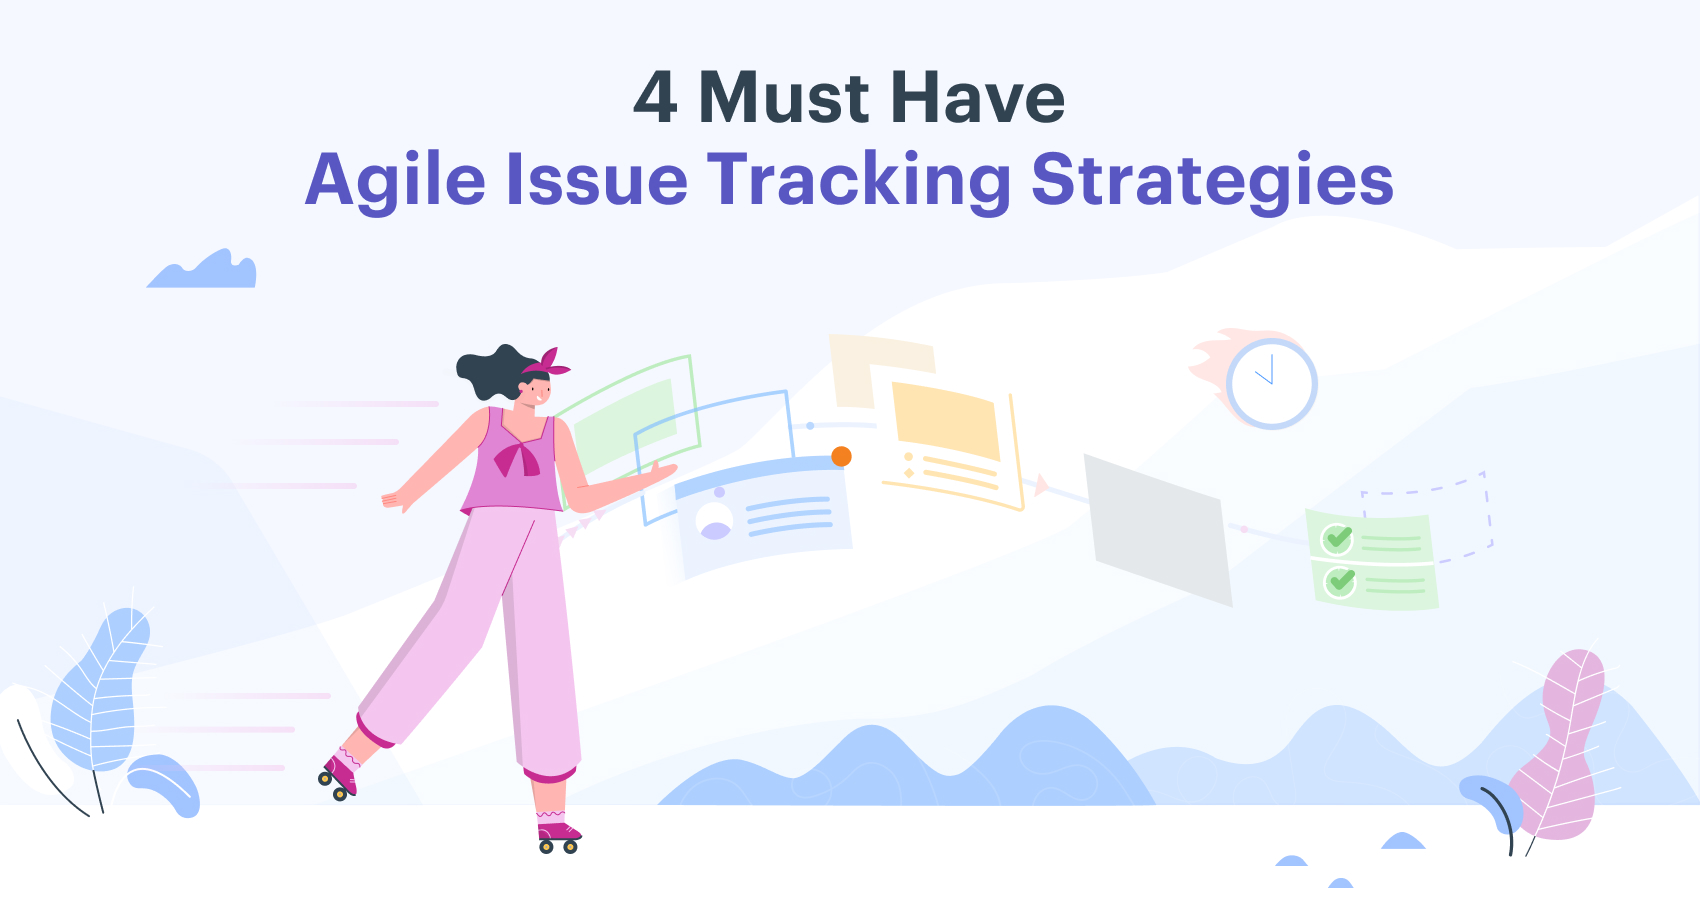 4 Must Have Agile Issue Tracking Strategies